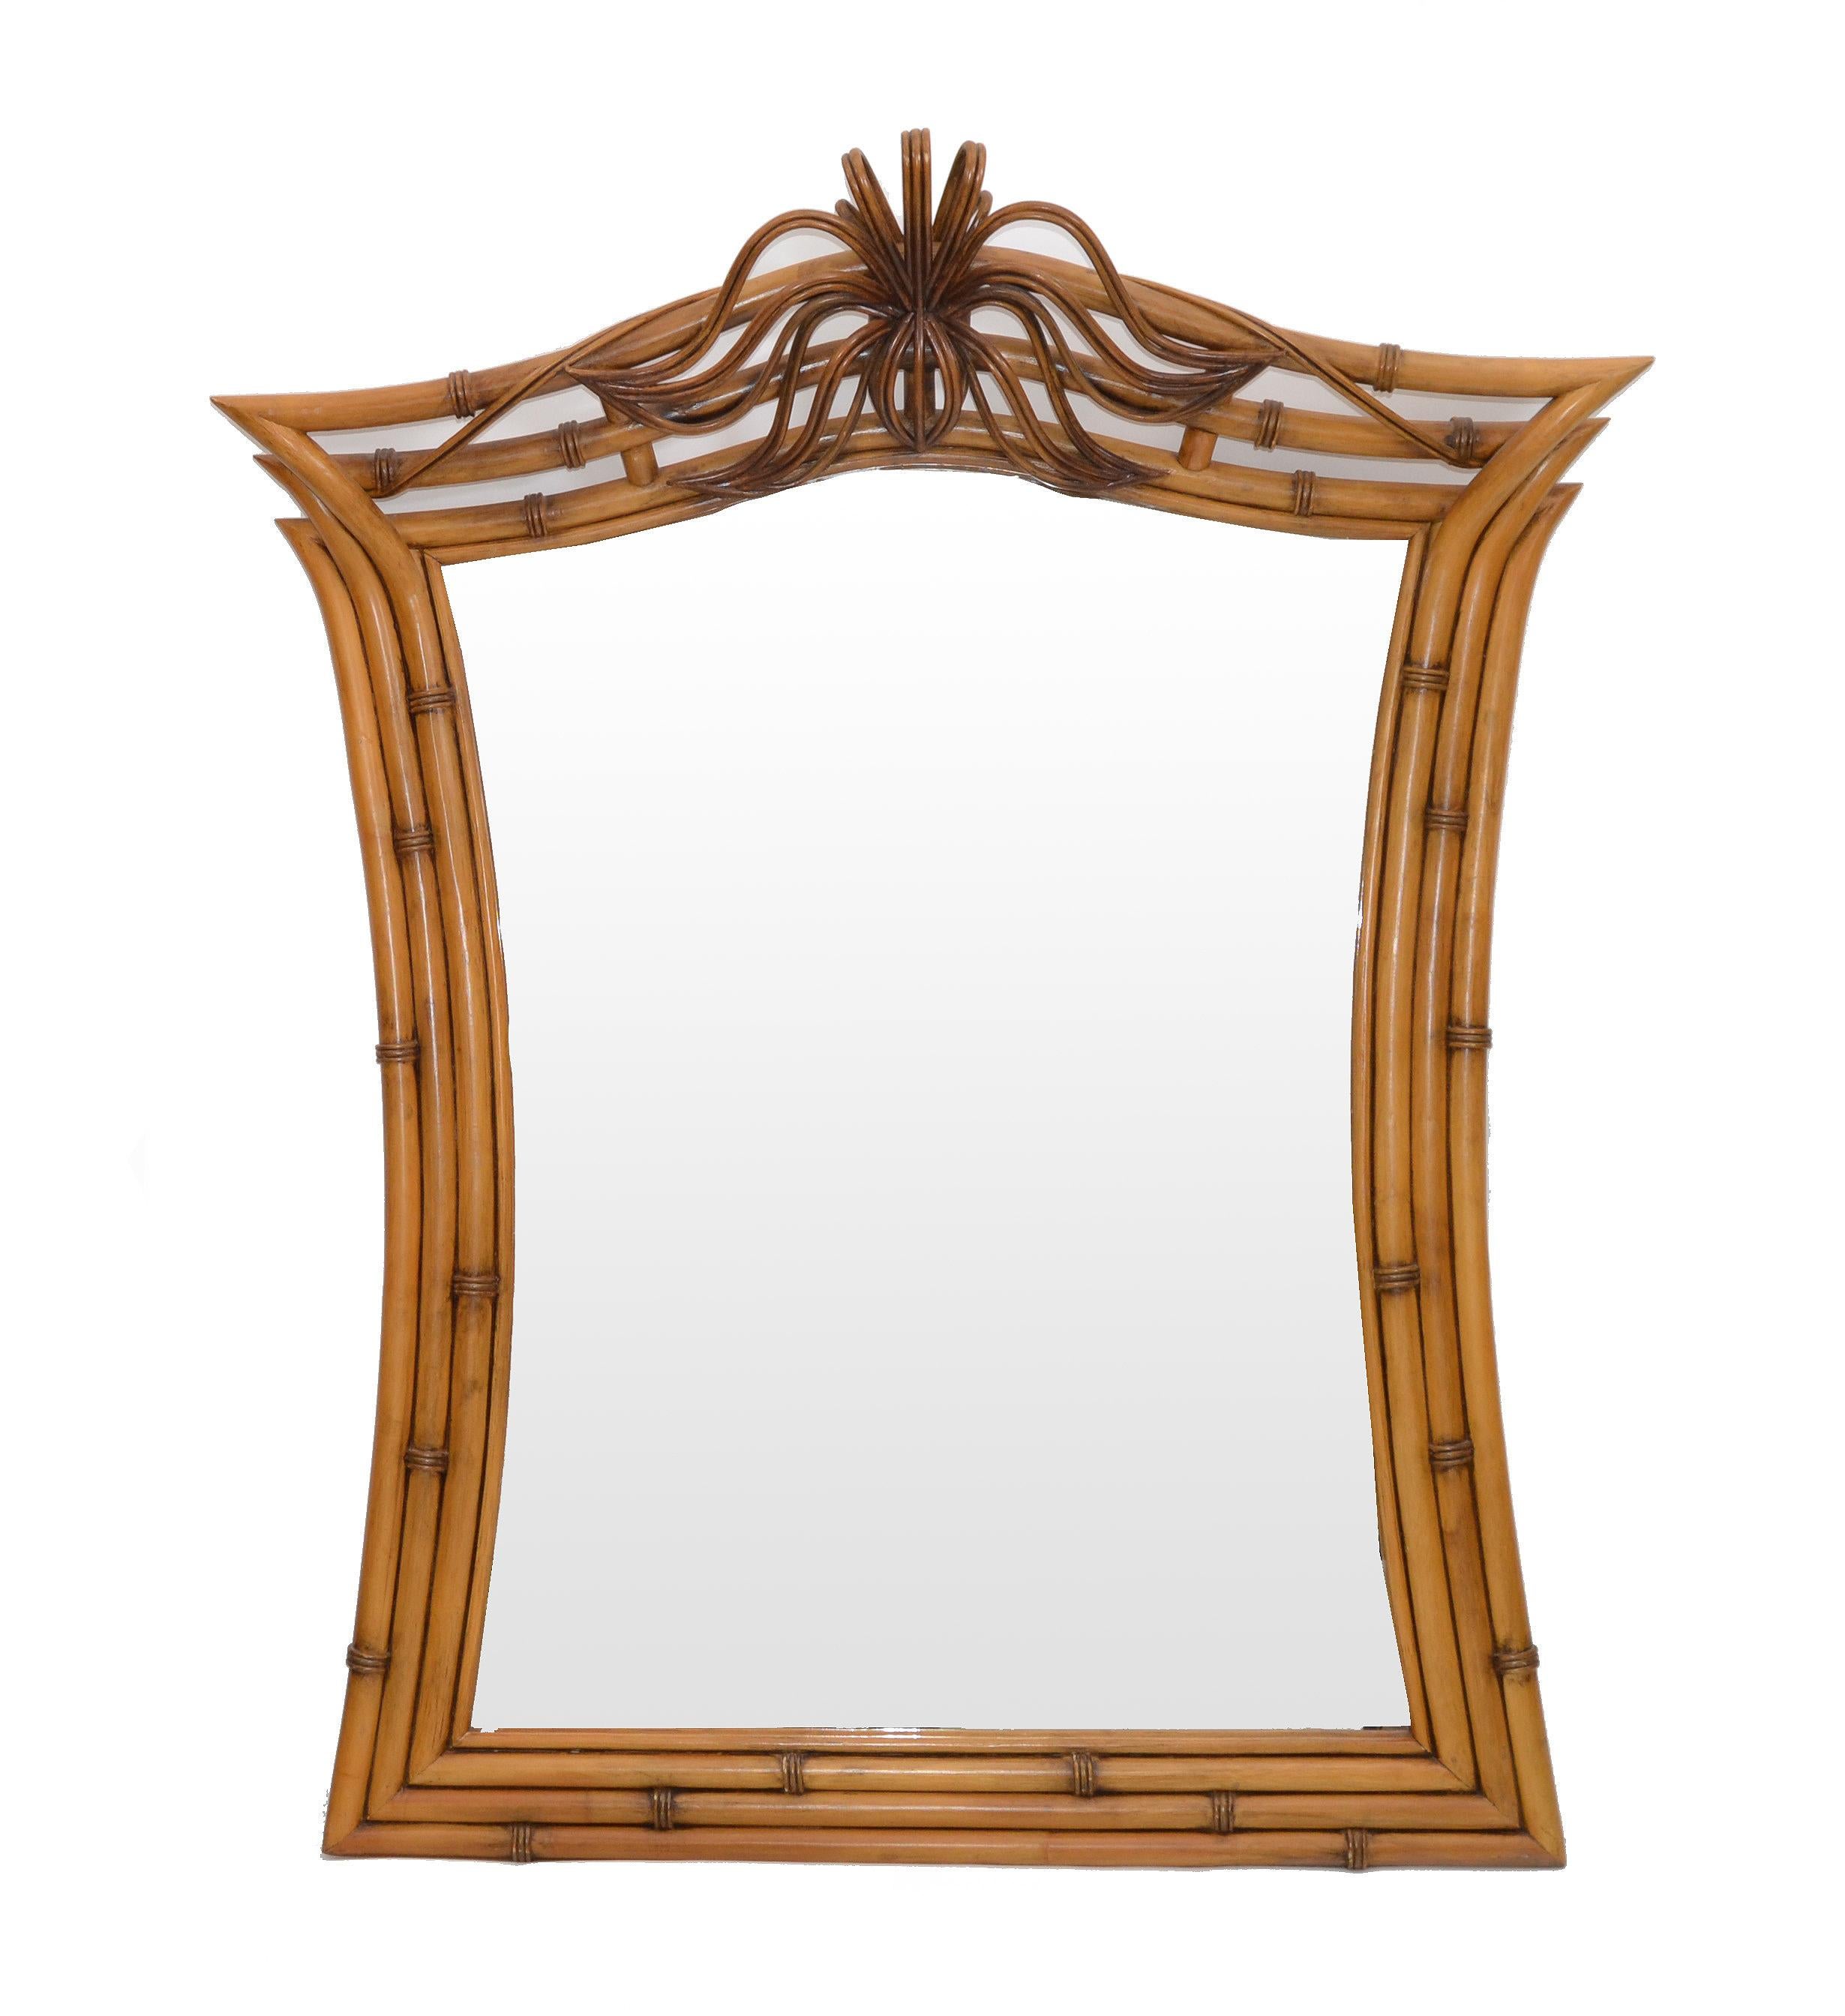 Mid-Century Modern Framed Handcrafted Bamboo, Wood and Wicker Wall Mirror, 1960s For Sale 7